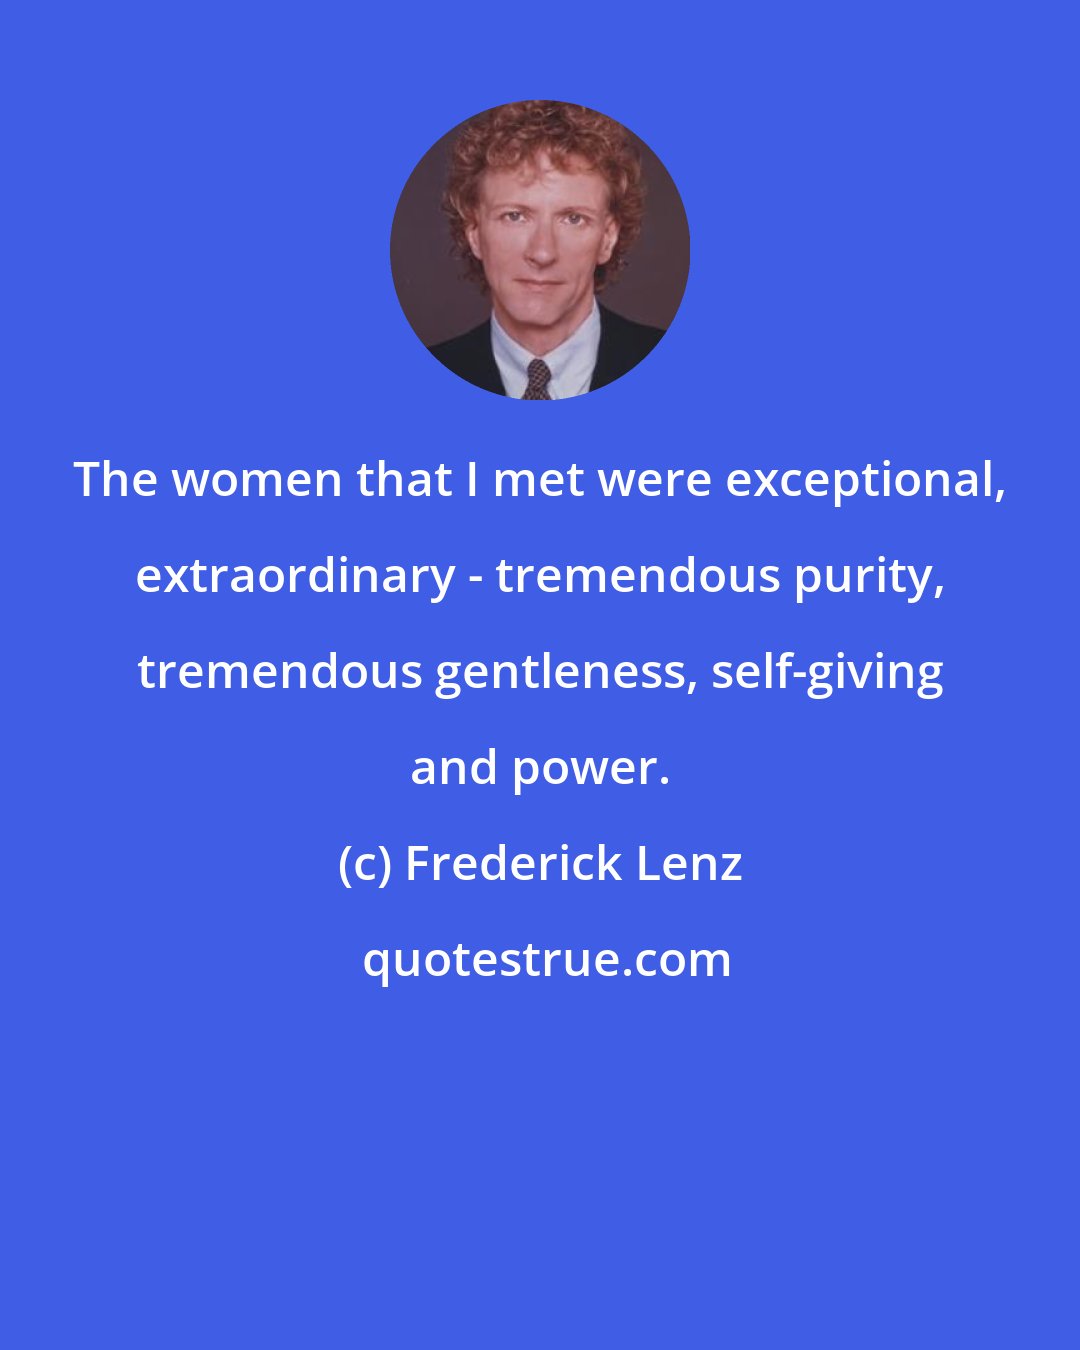 Frederick Lenz: The women that I met were exceptional, extraordinary - tremendous purity, tremendous gentleness, self-giving and power.